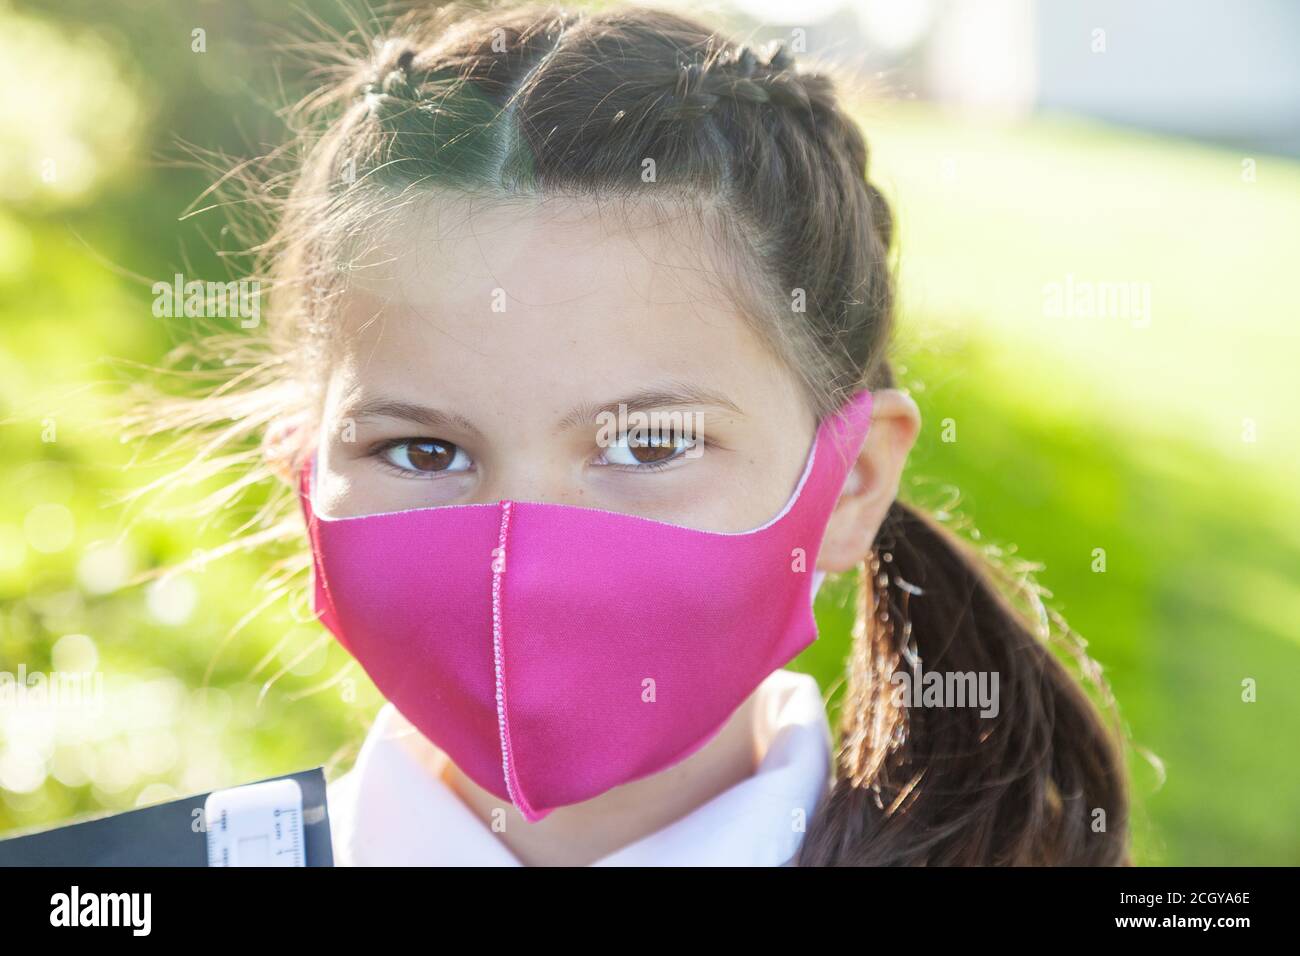 Close up of the face of a 10 year old girl with her hair in braids and wearing a pink face mask. Stock Photo